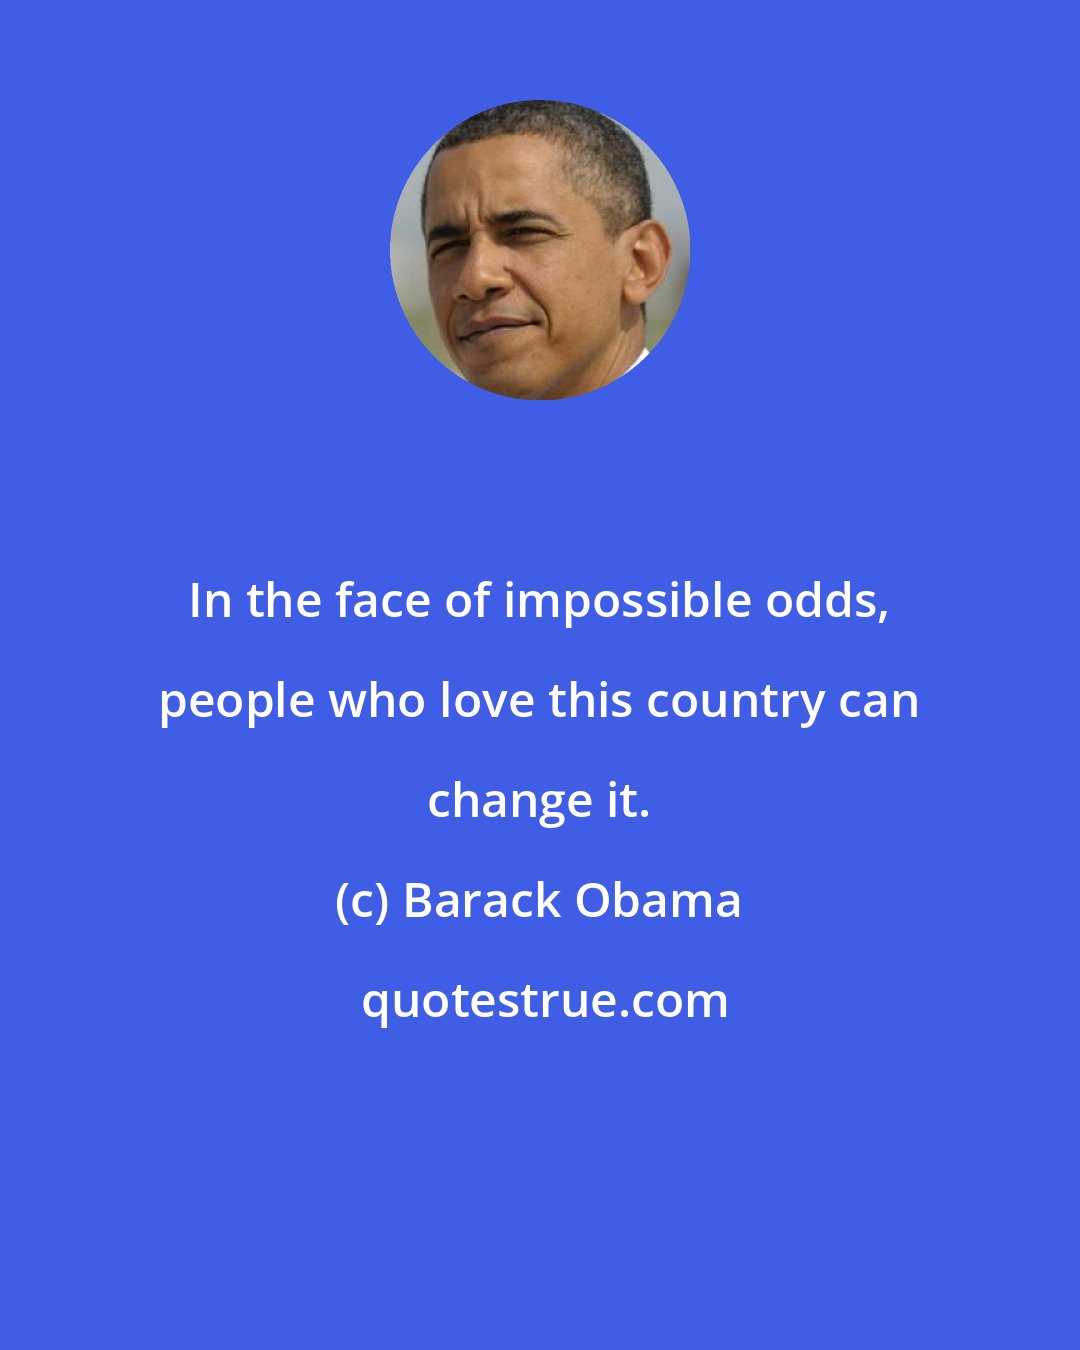 Barack Obama: In the face of impossible odds, people who love this country can change it.